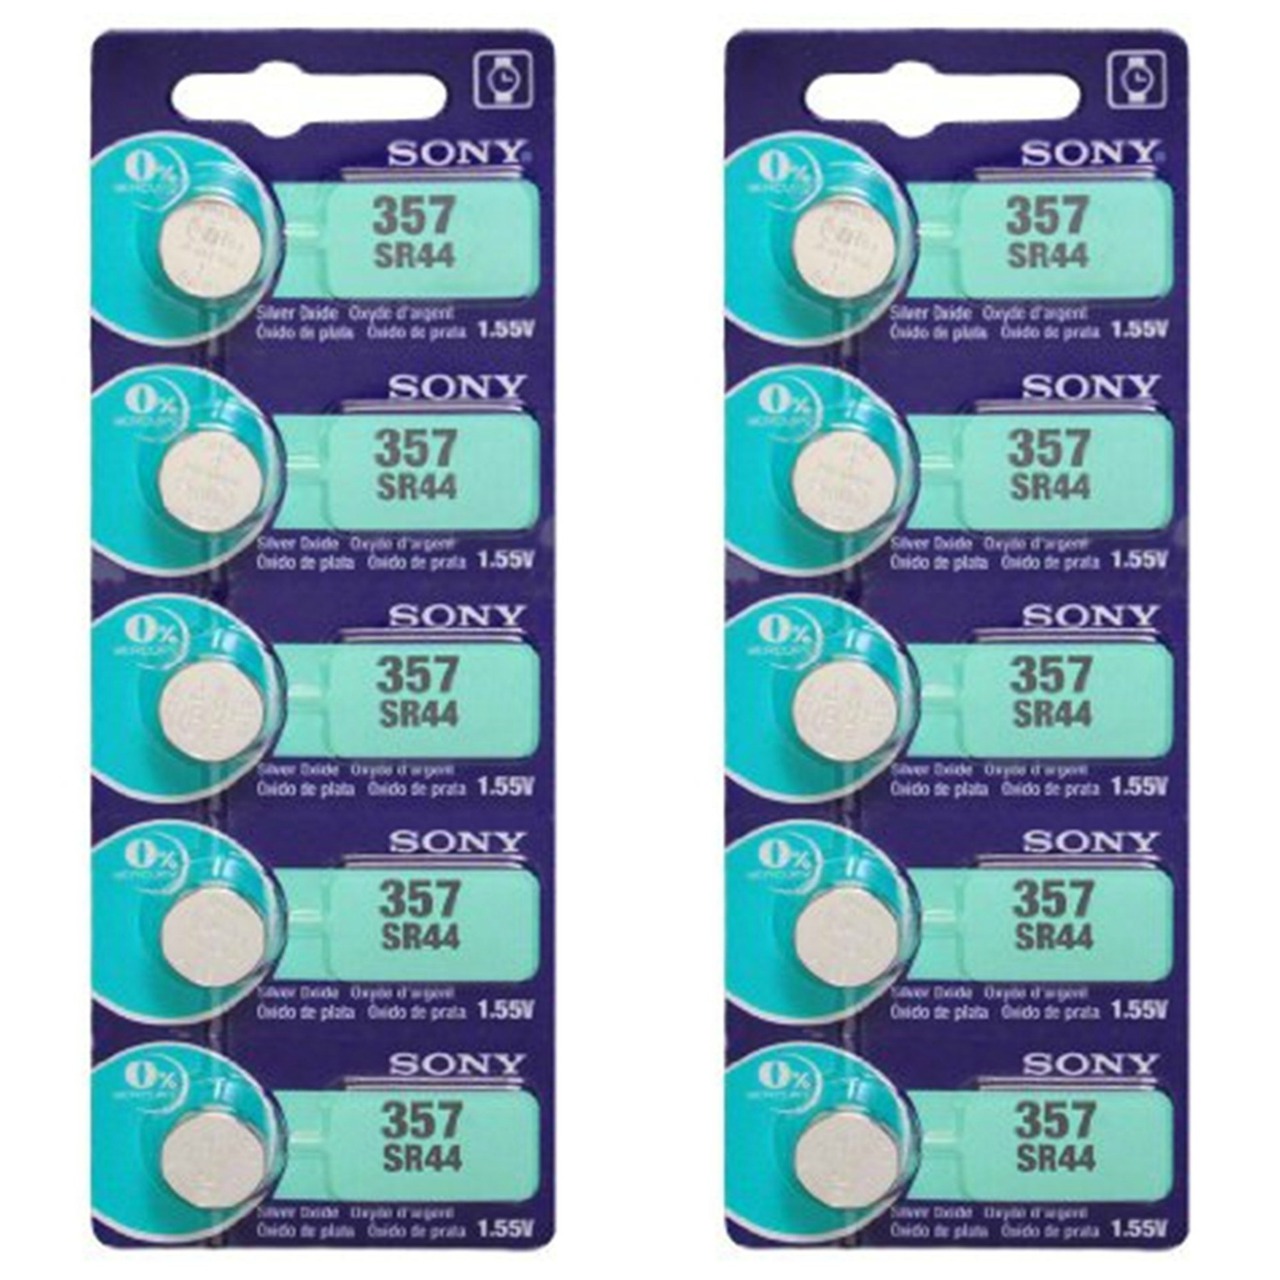 Sony 357/303 - SR44 Silver Oxide Button Battery 1.55V - 10 Pack + FREE SHIPPING!